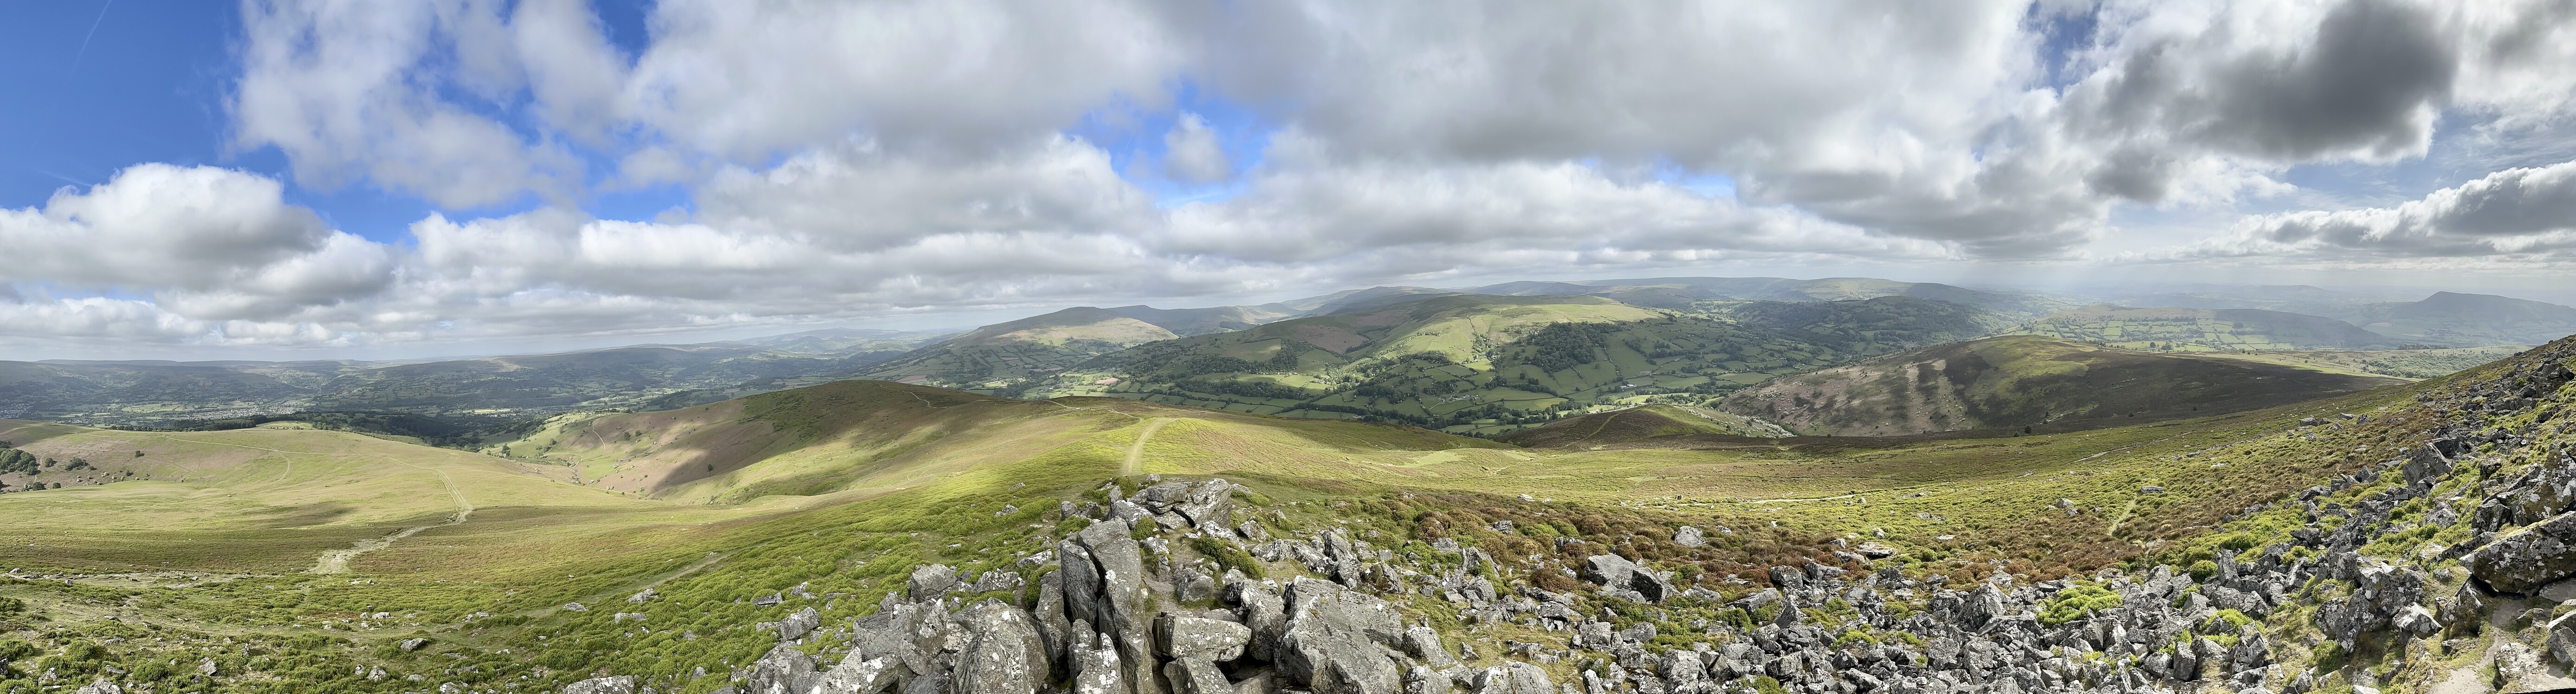 A panoramic view of hills, valleys, and grass as far as can be seen.